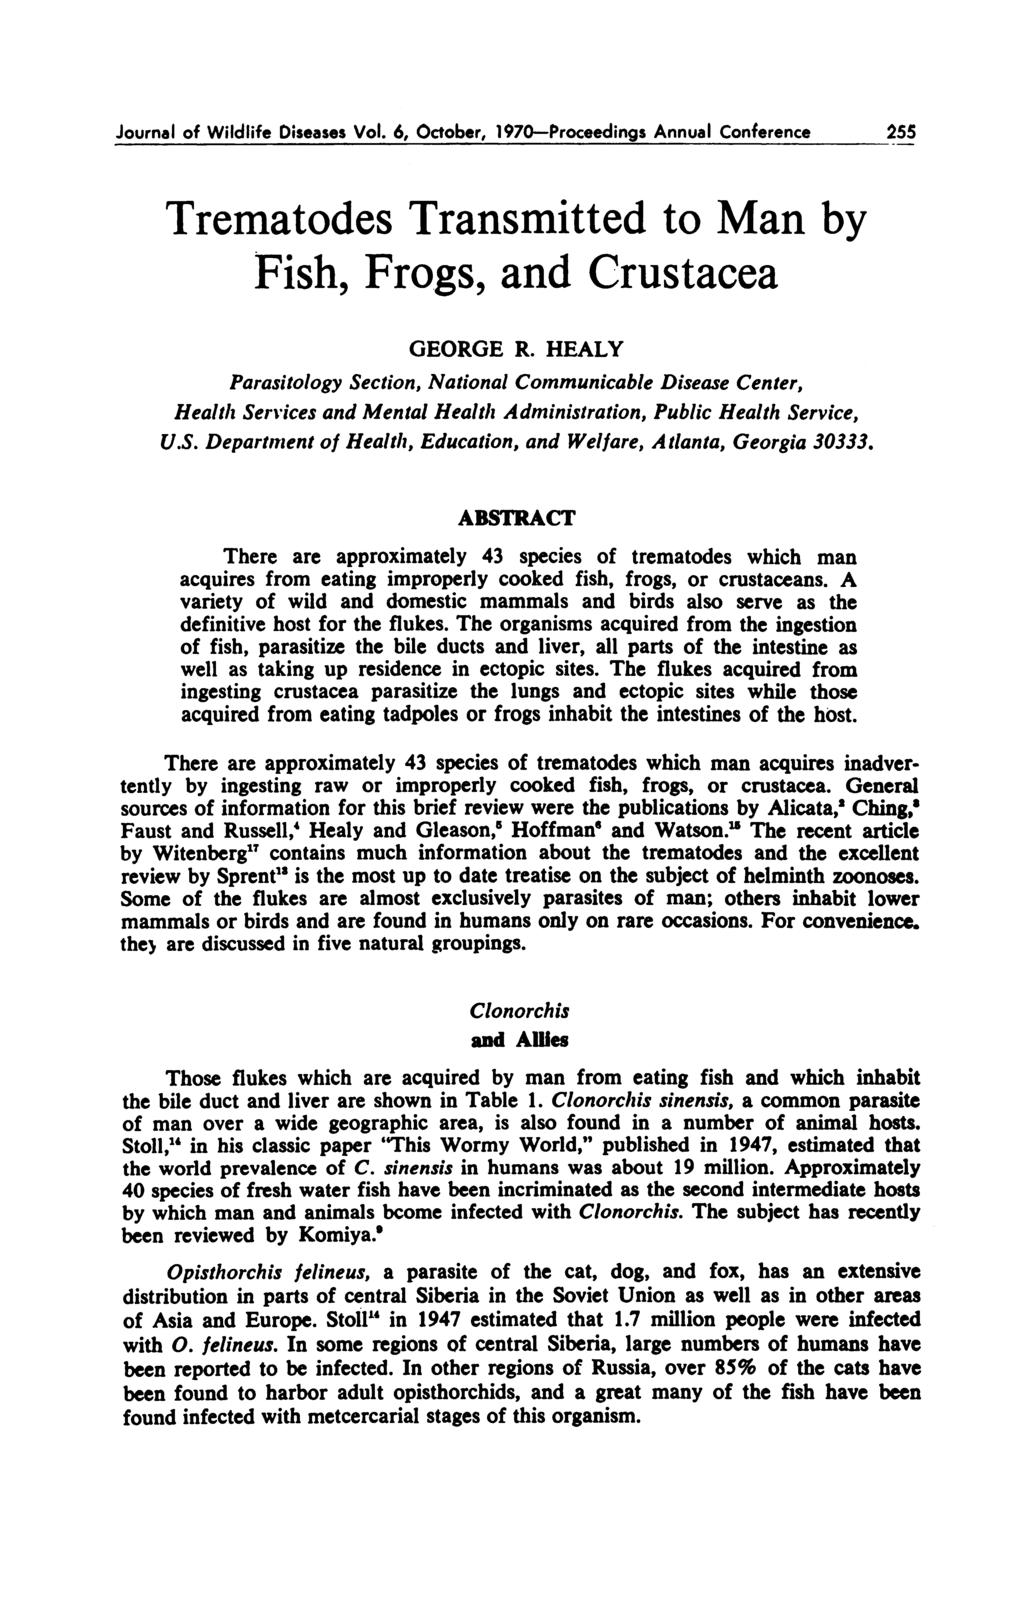 Journal of Wildlife Diseases Vol. 6, October, 1970-Proceedings Annual Conference 255 Trematodes Transmitted to Man by Fish, Frogs, and Crustacea GEORGE R.